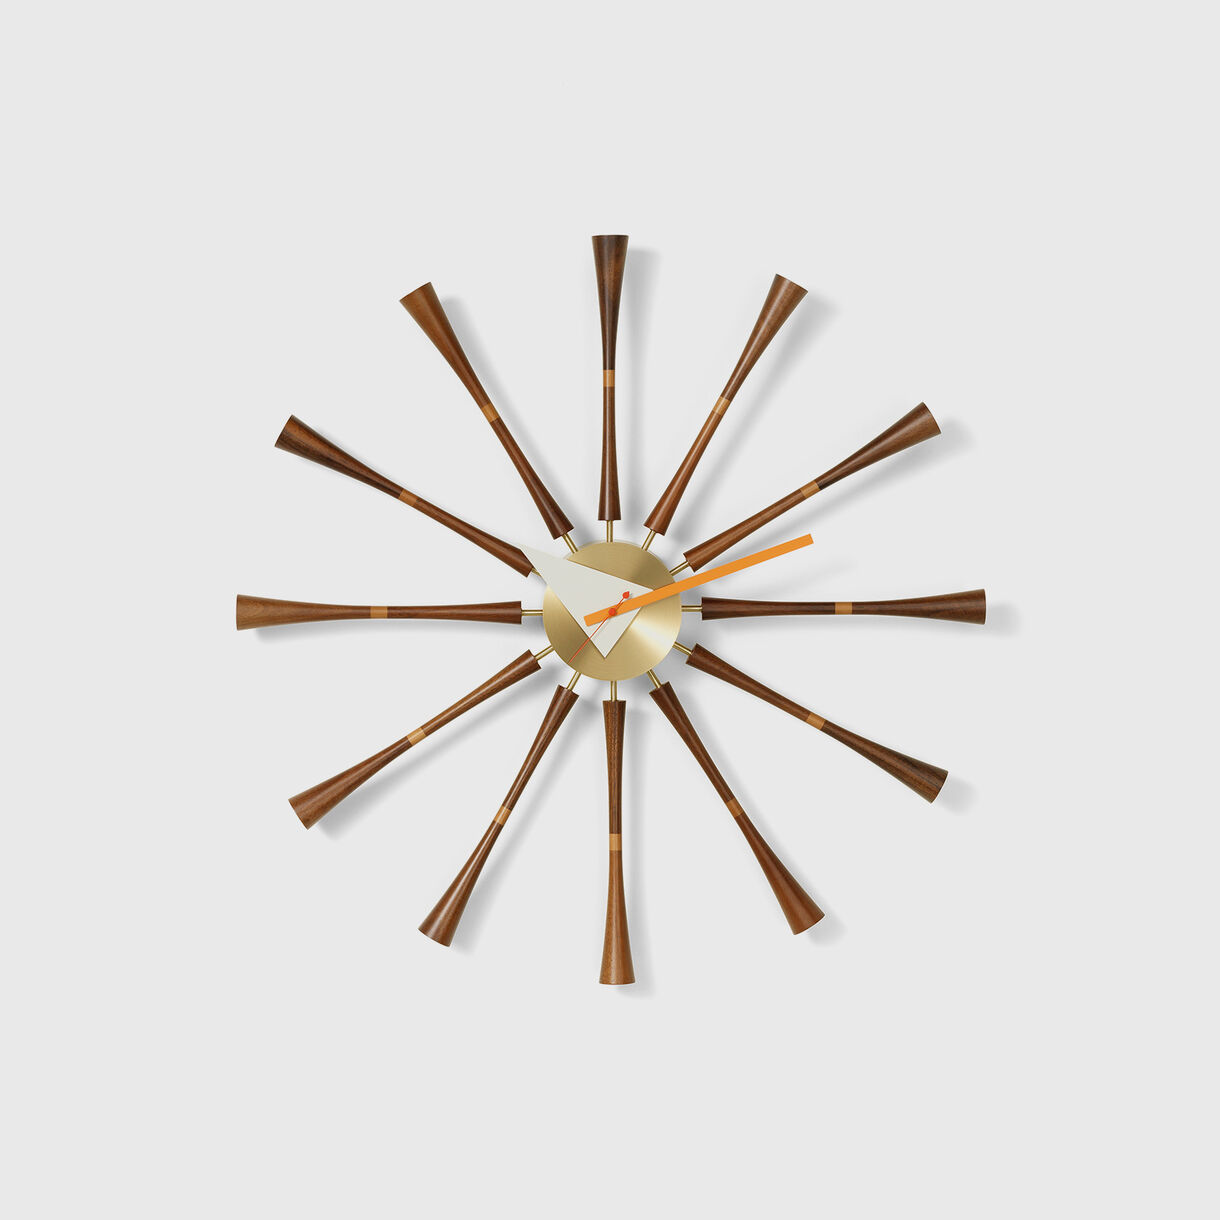 Spindle Wall Clock